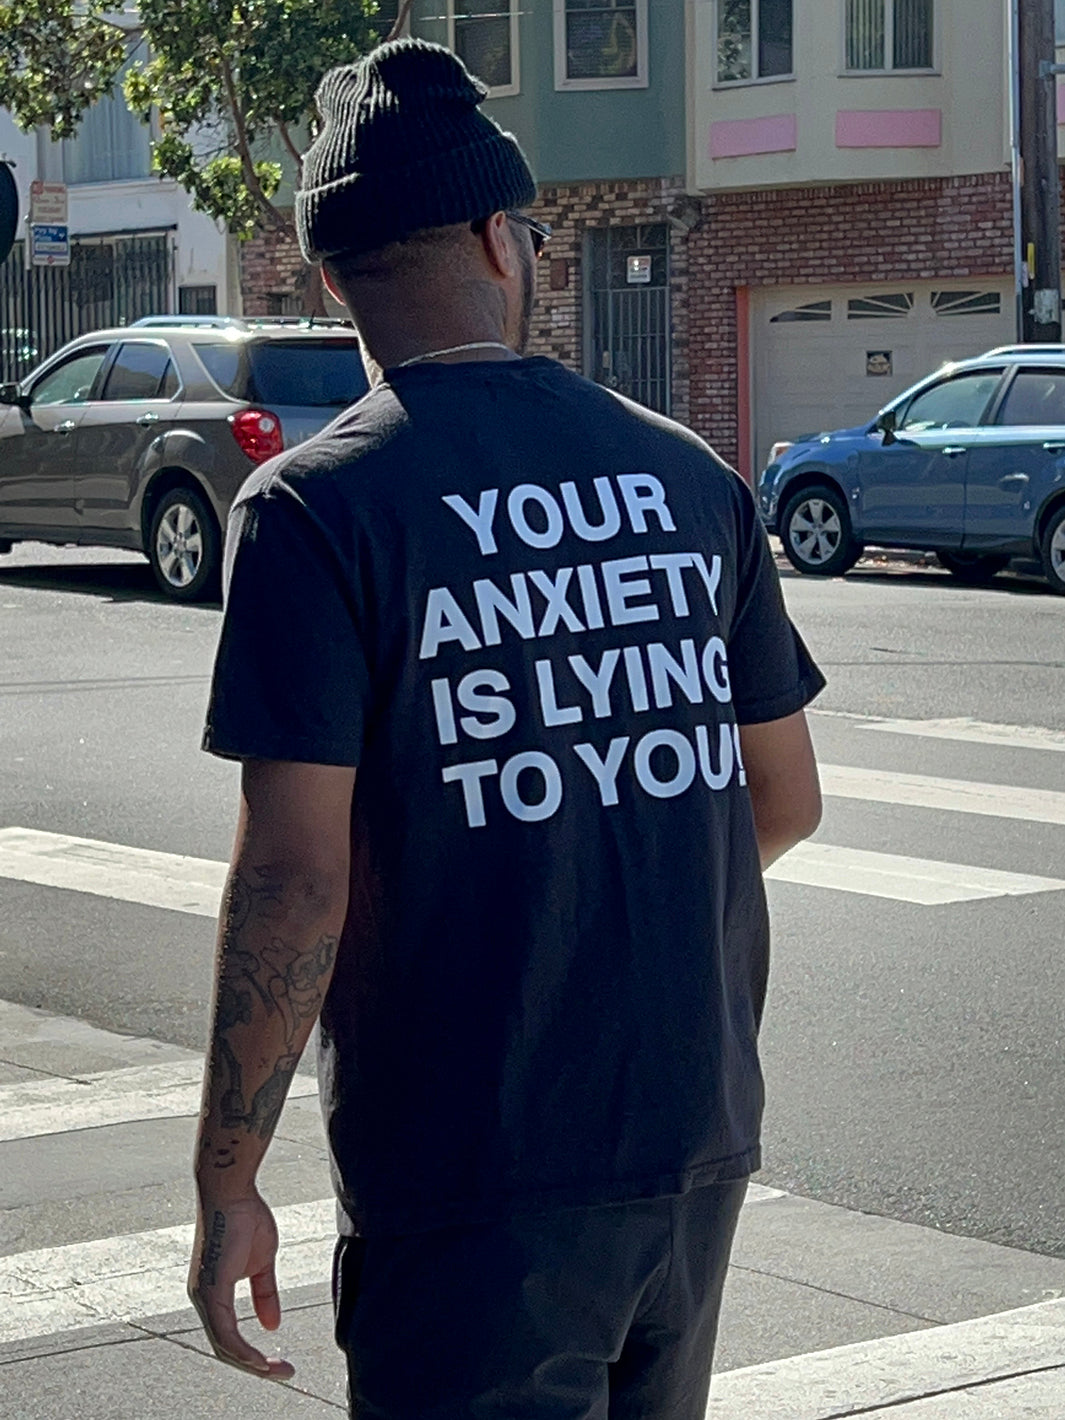 Your Anxiety Is Lying To You Tee